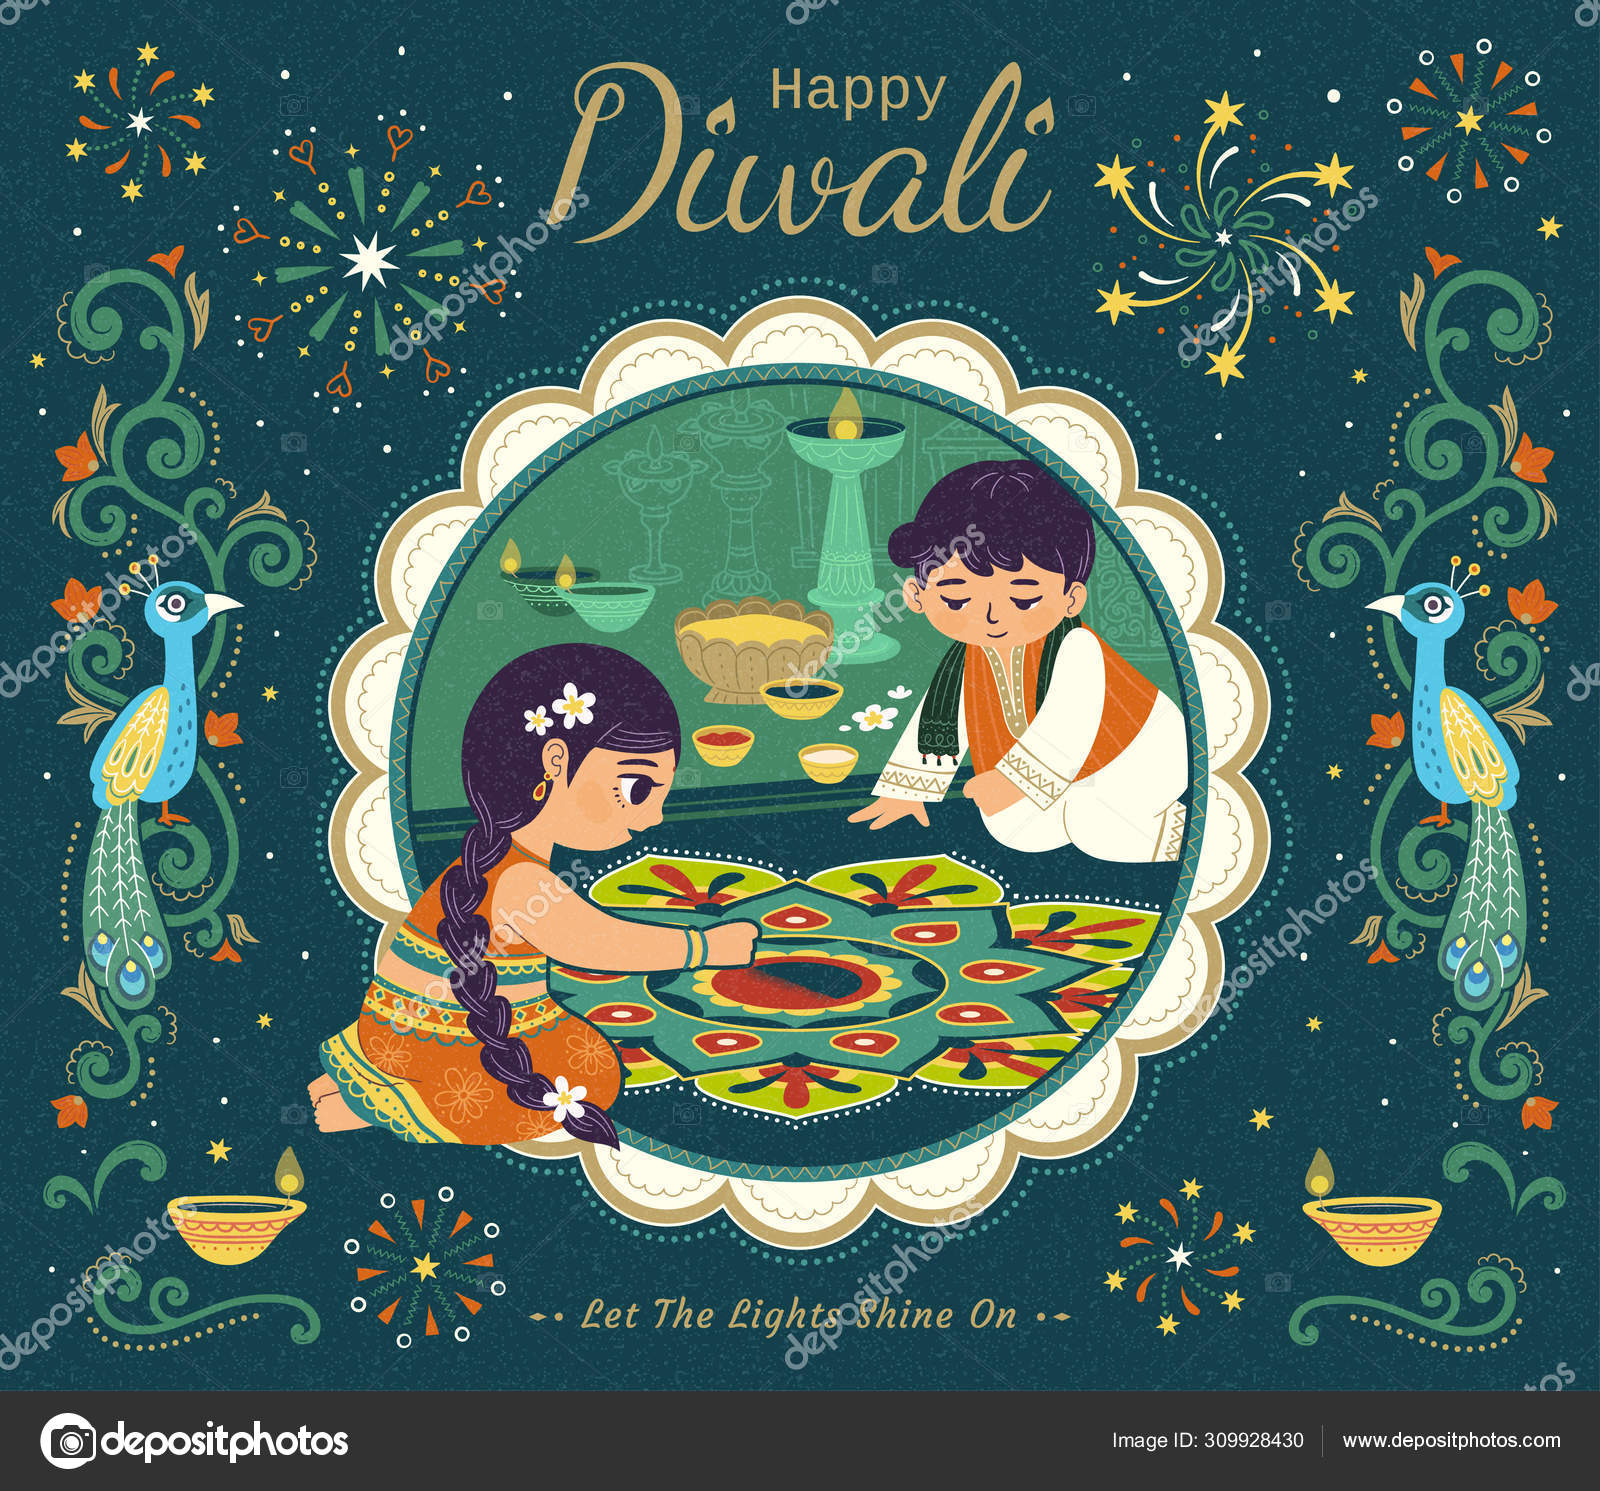 Diwali with child Vector Art Stock Images | Depositphotos